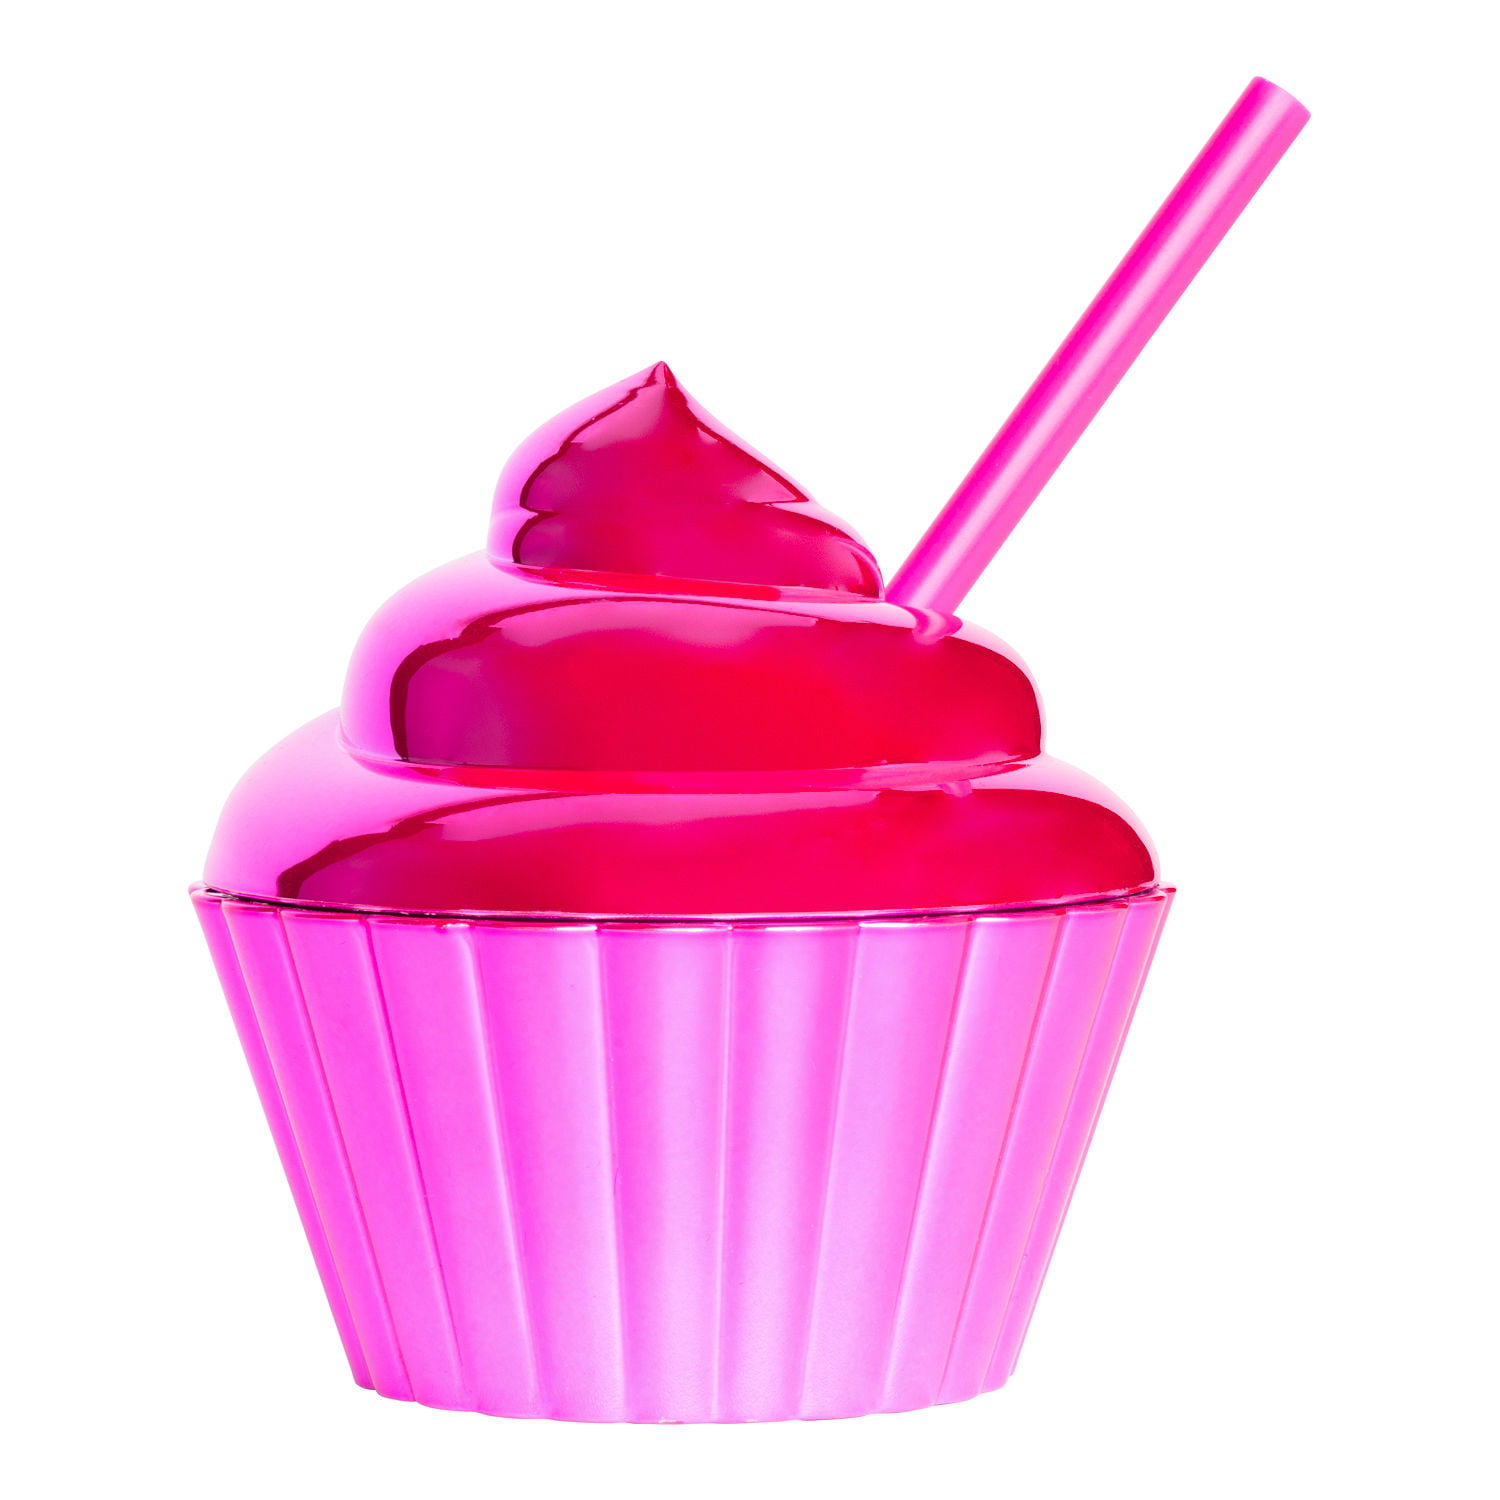 Strictly Fancy Hot Pink Cupcake Cups with Straws, 2PK 